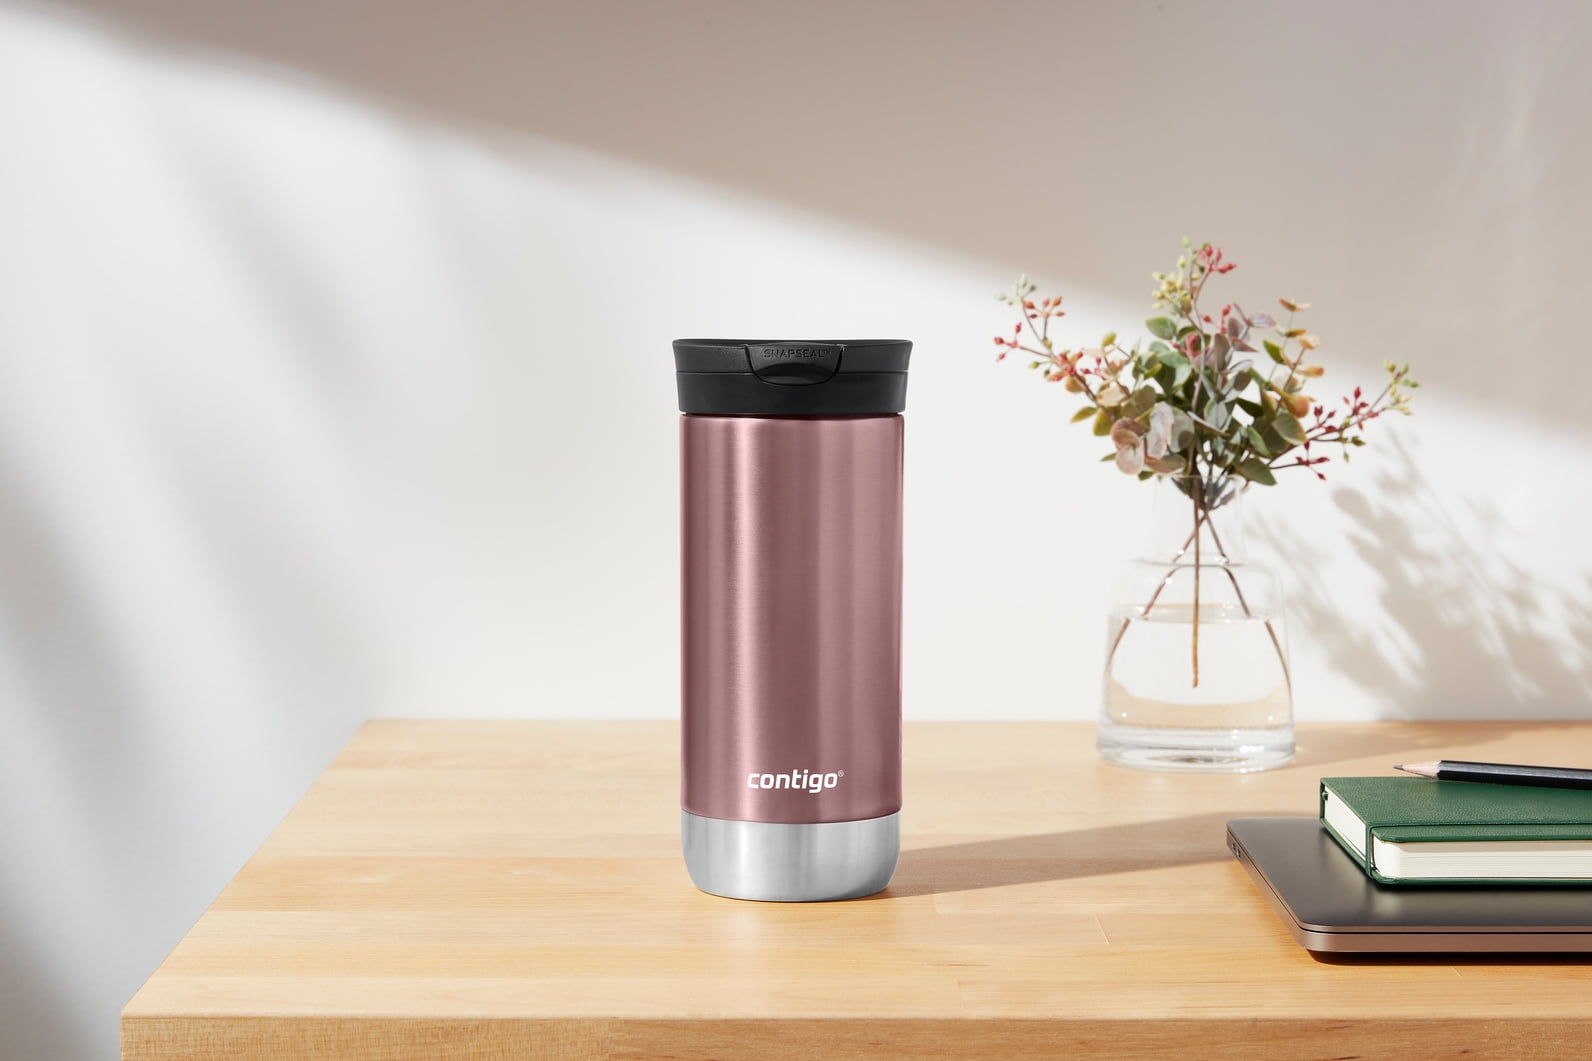 Dropship Contigo Huron 2.0 Stainless Steel Travel Mug With SNAPSEAL Lid And  Handle In Black, 20 Fl Oz. to Sell Online at a Lower Price